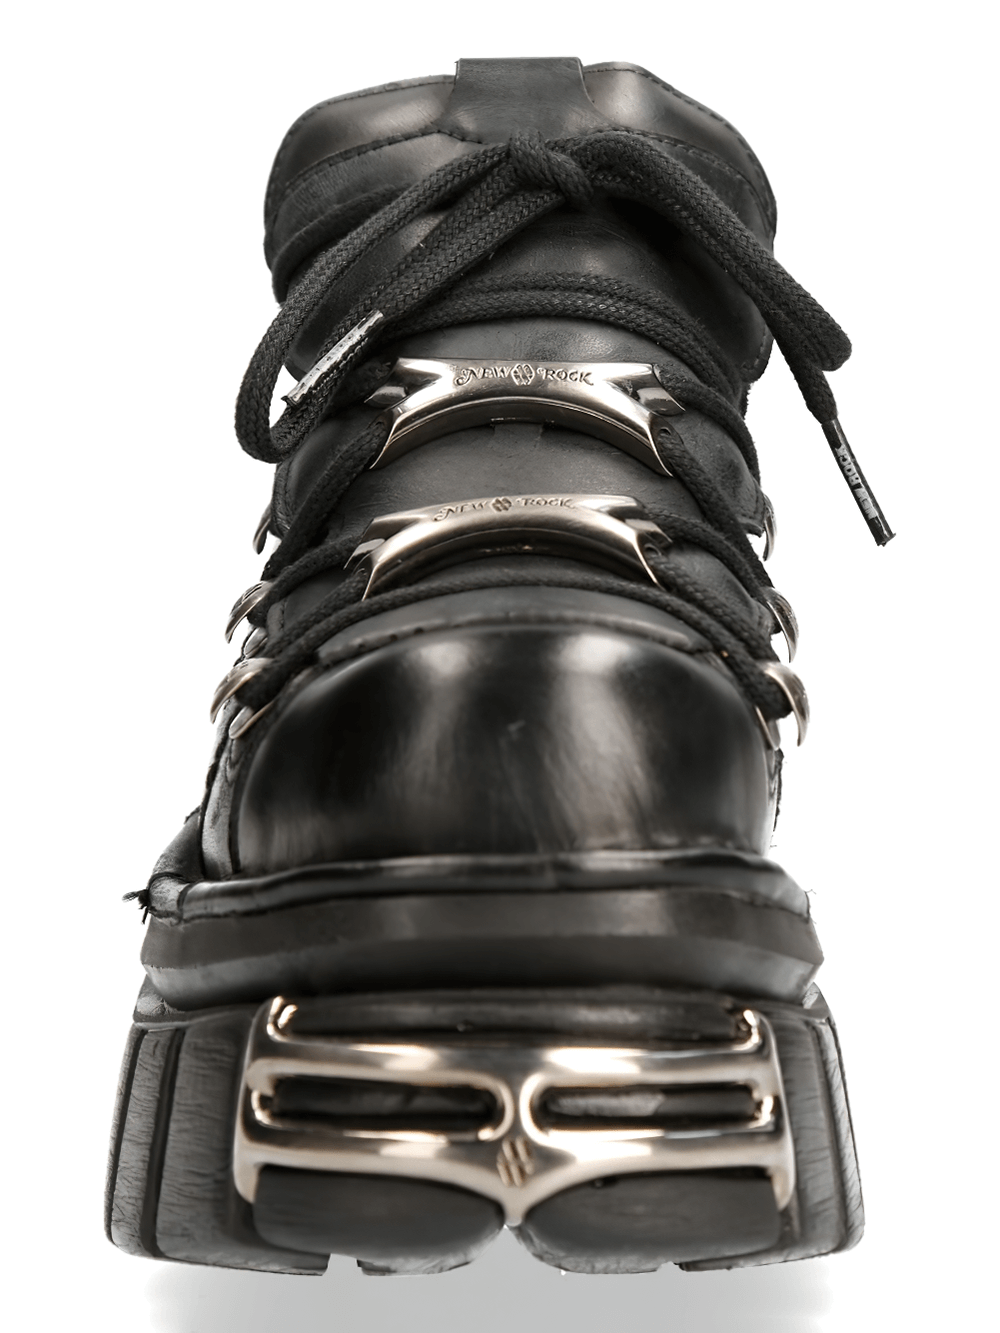 NEW ROCK Black Leather Ankle Boots with Metal Details